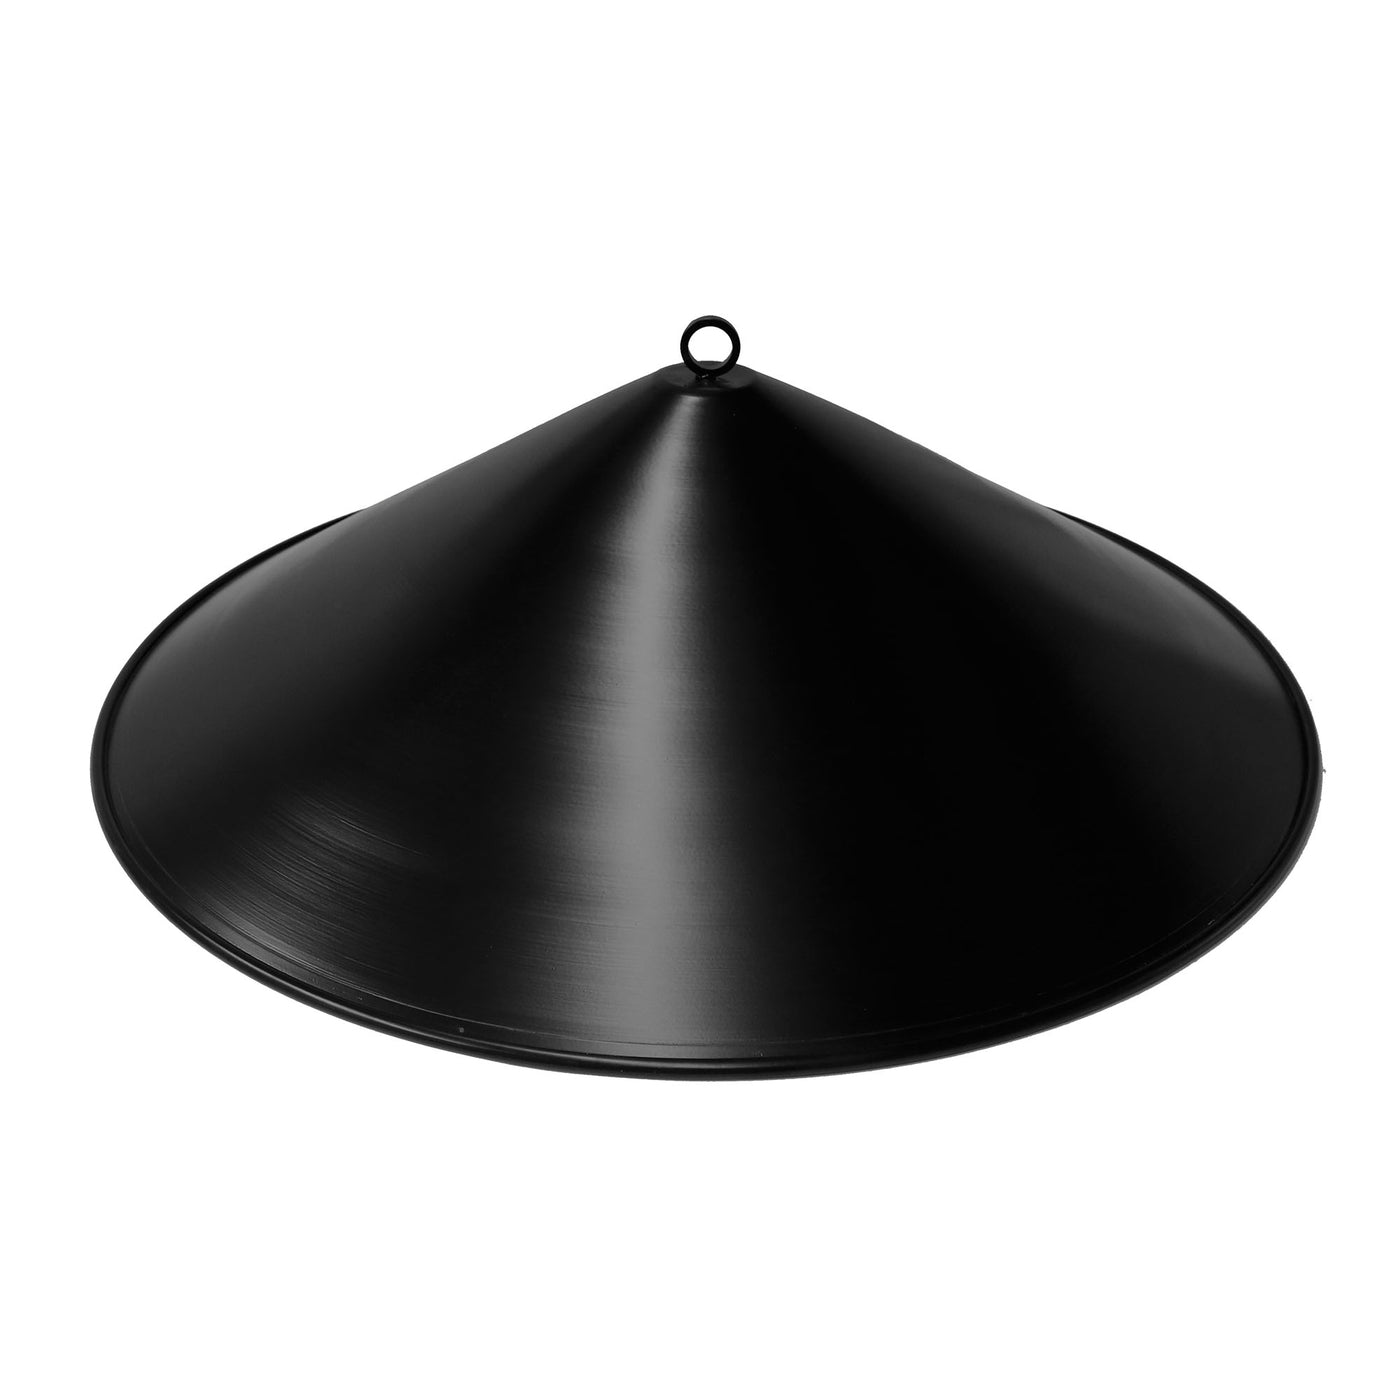 Theoutdoorplus CONE FIRE PIT COVER OPT-RCB17